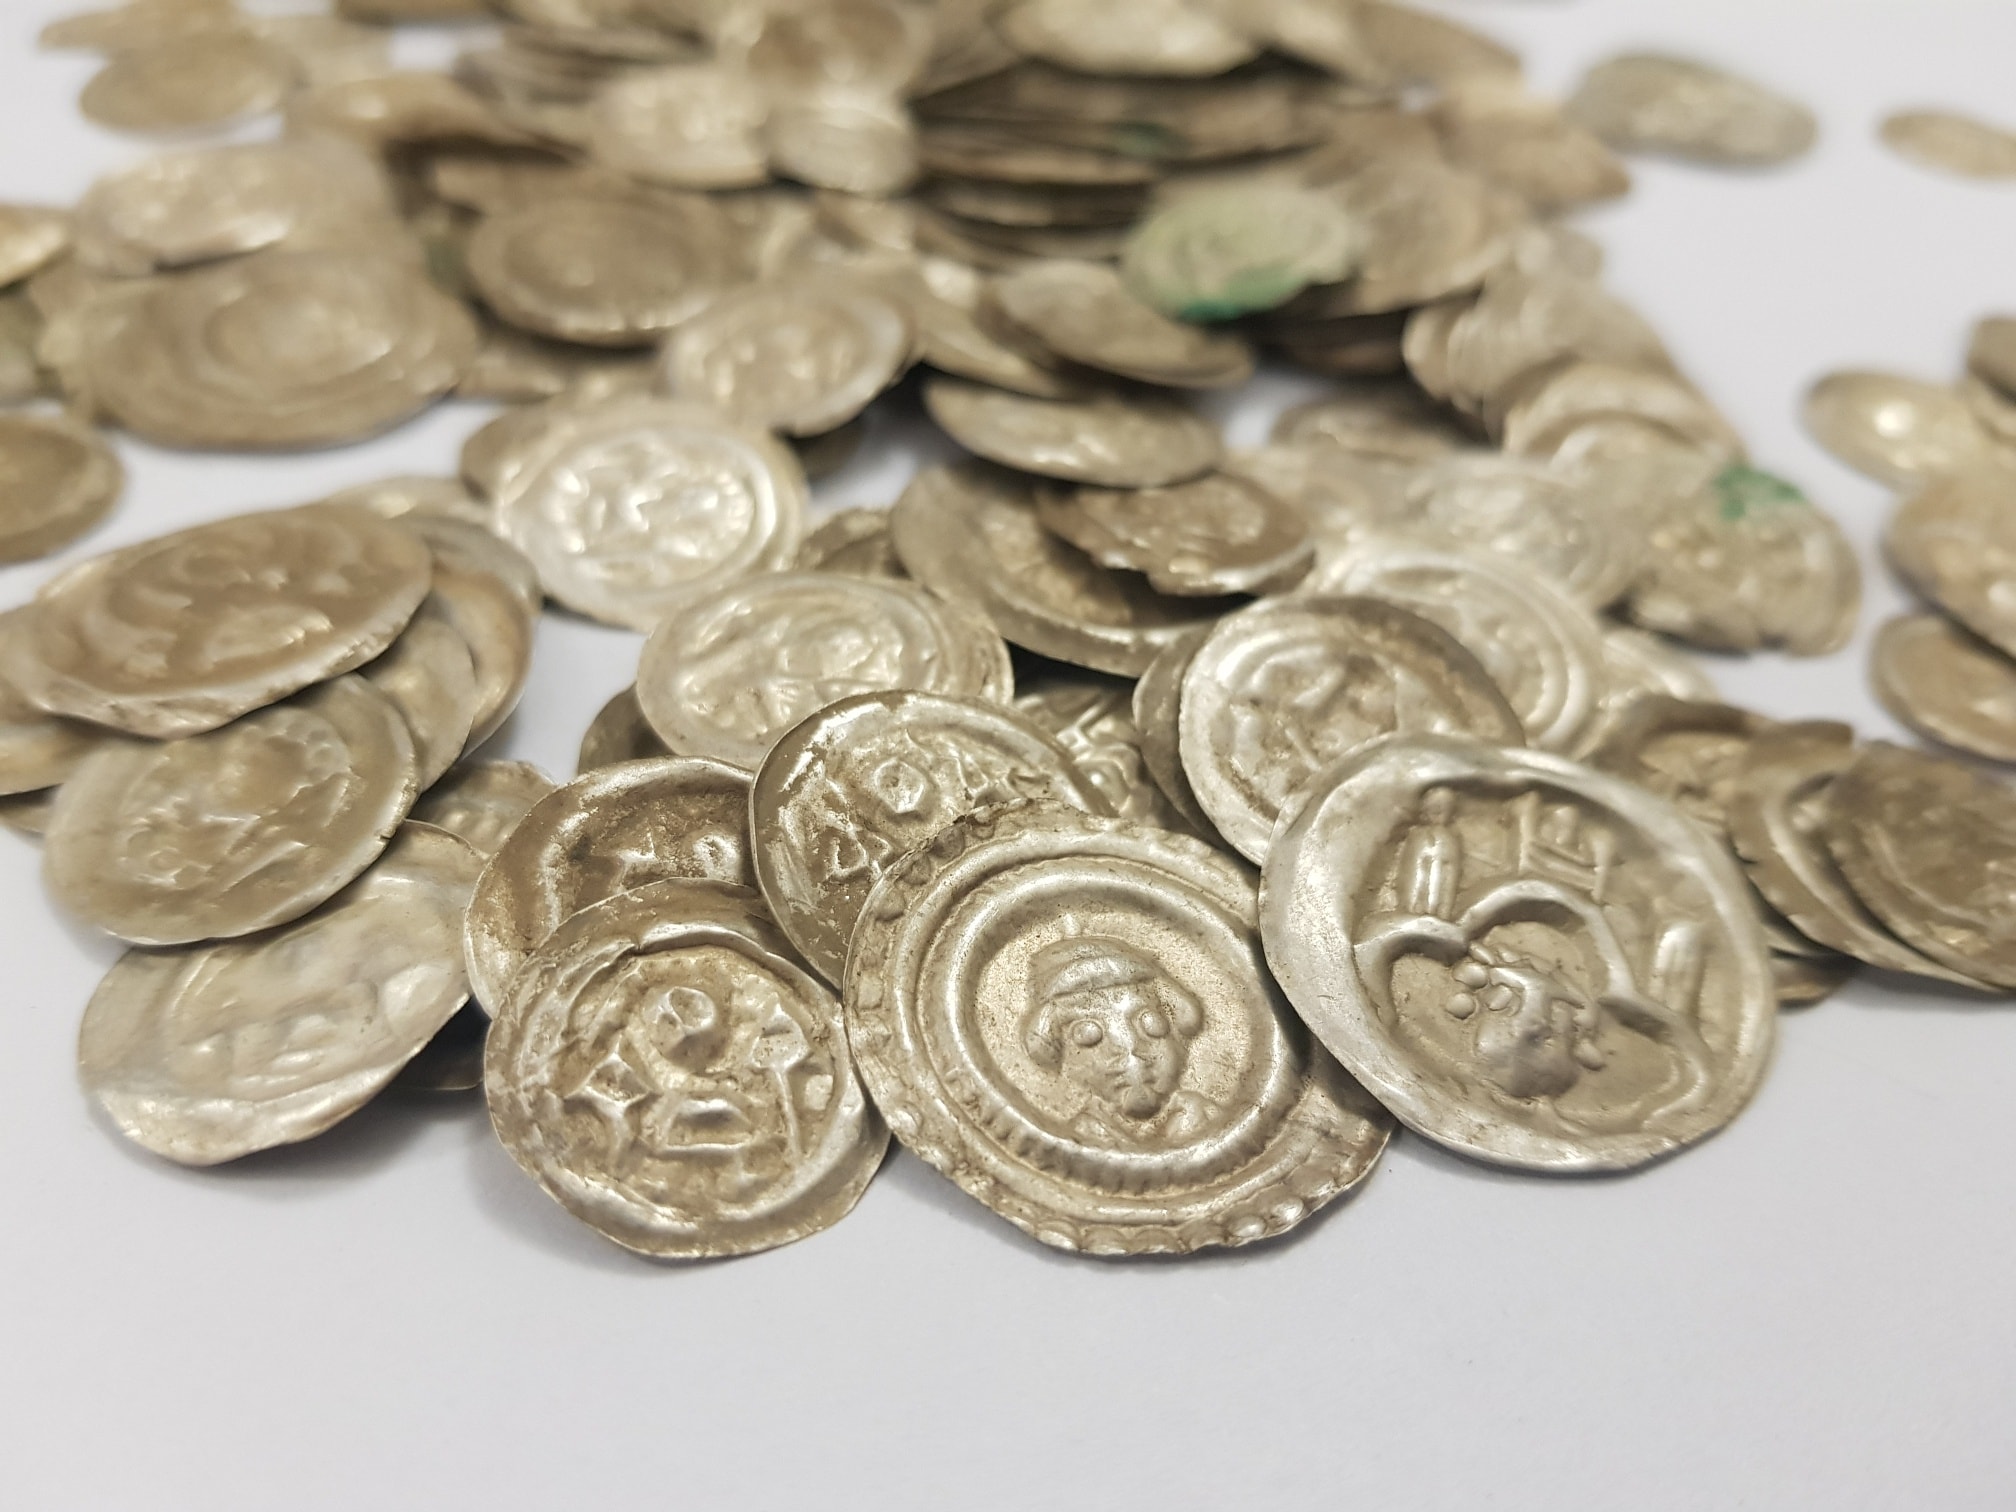 A rare collection of bracteates – thin, single-sided medieval coins – has been dug up by a dog near the city of Wałbrzych in southwestern Poland.